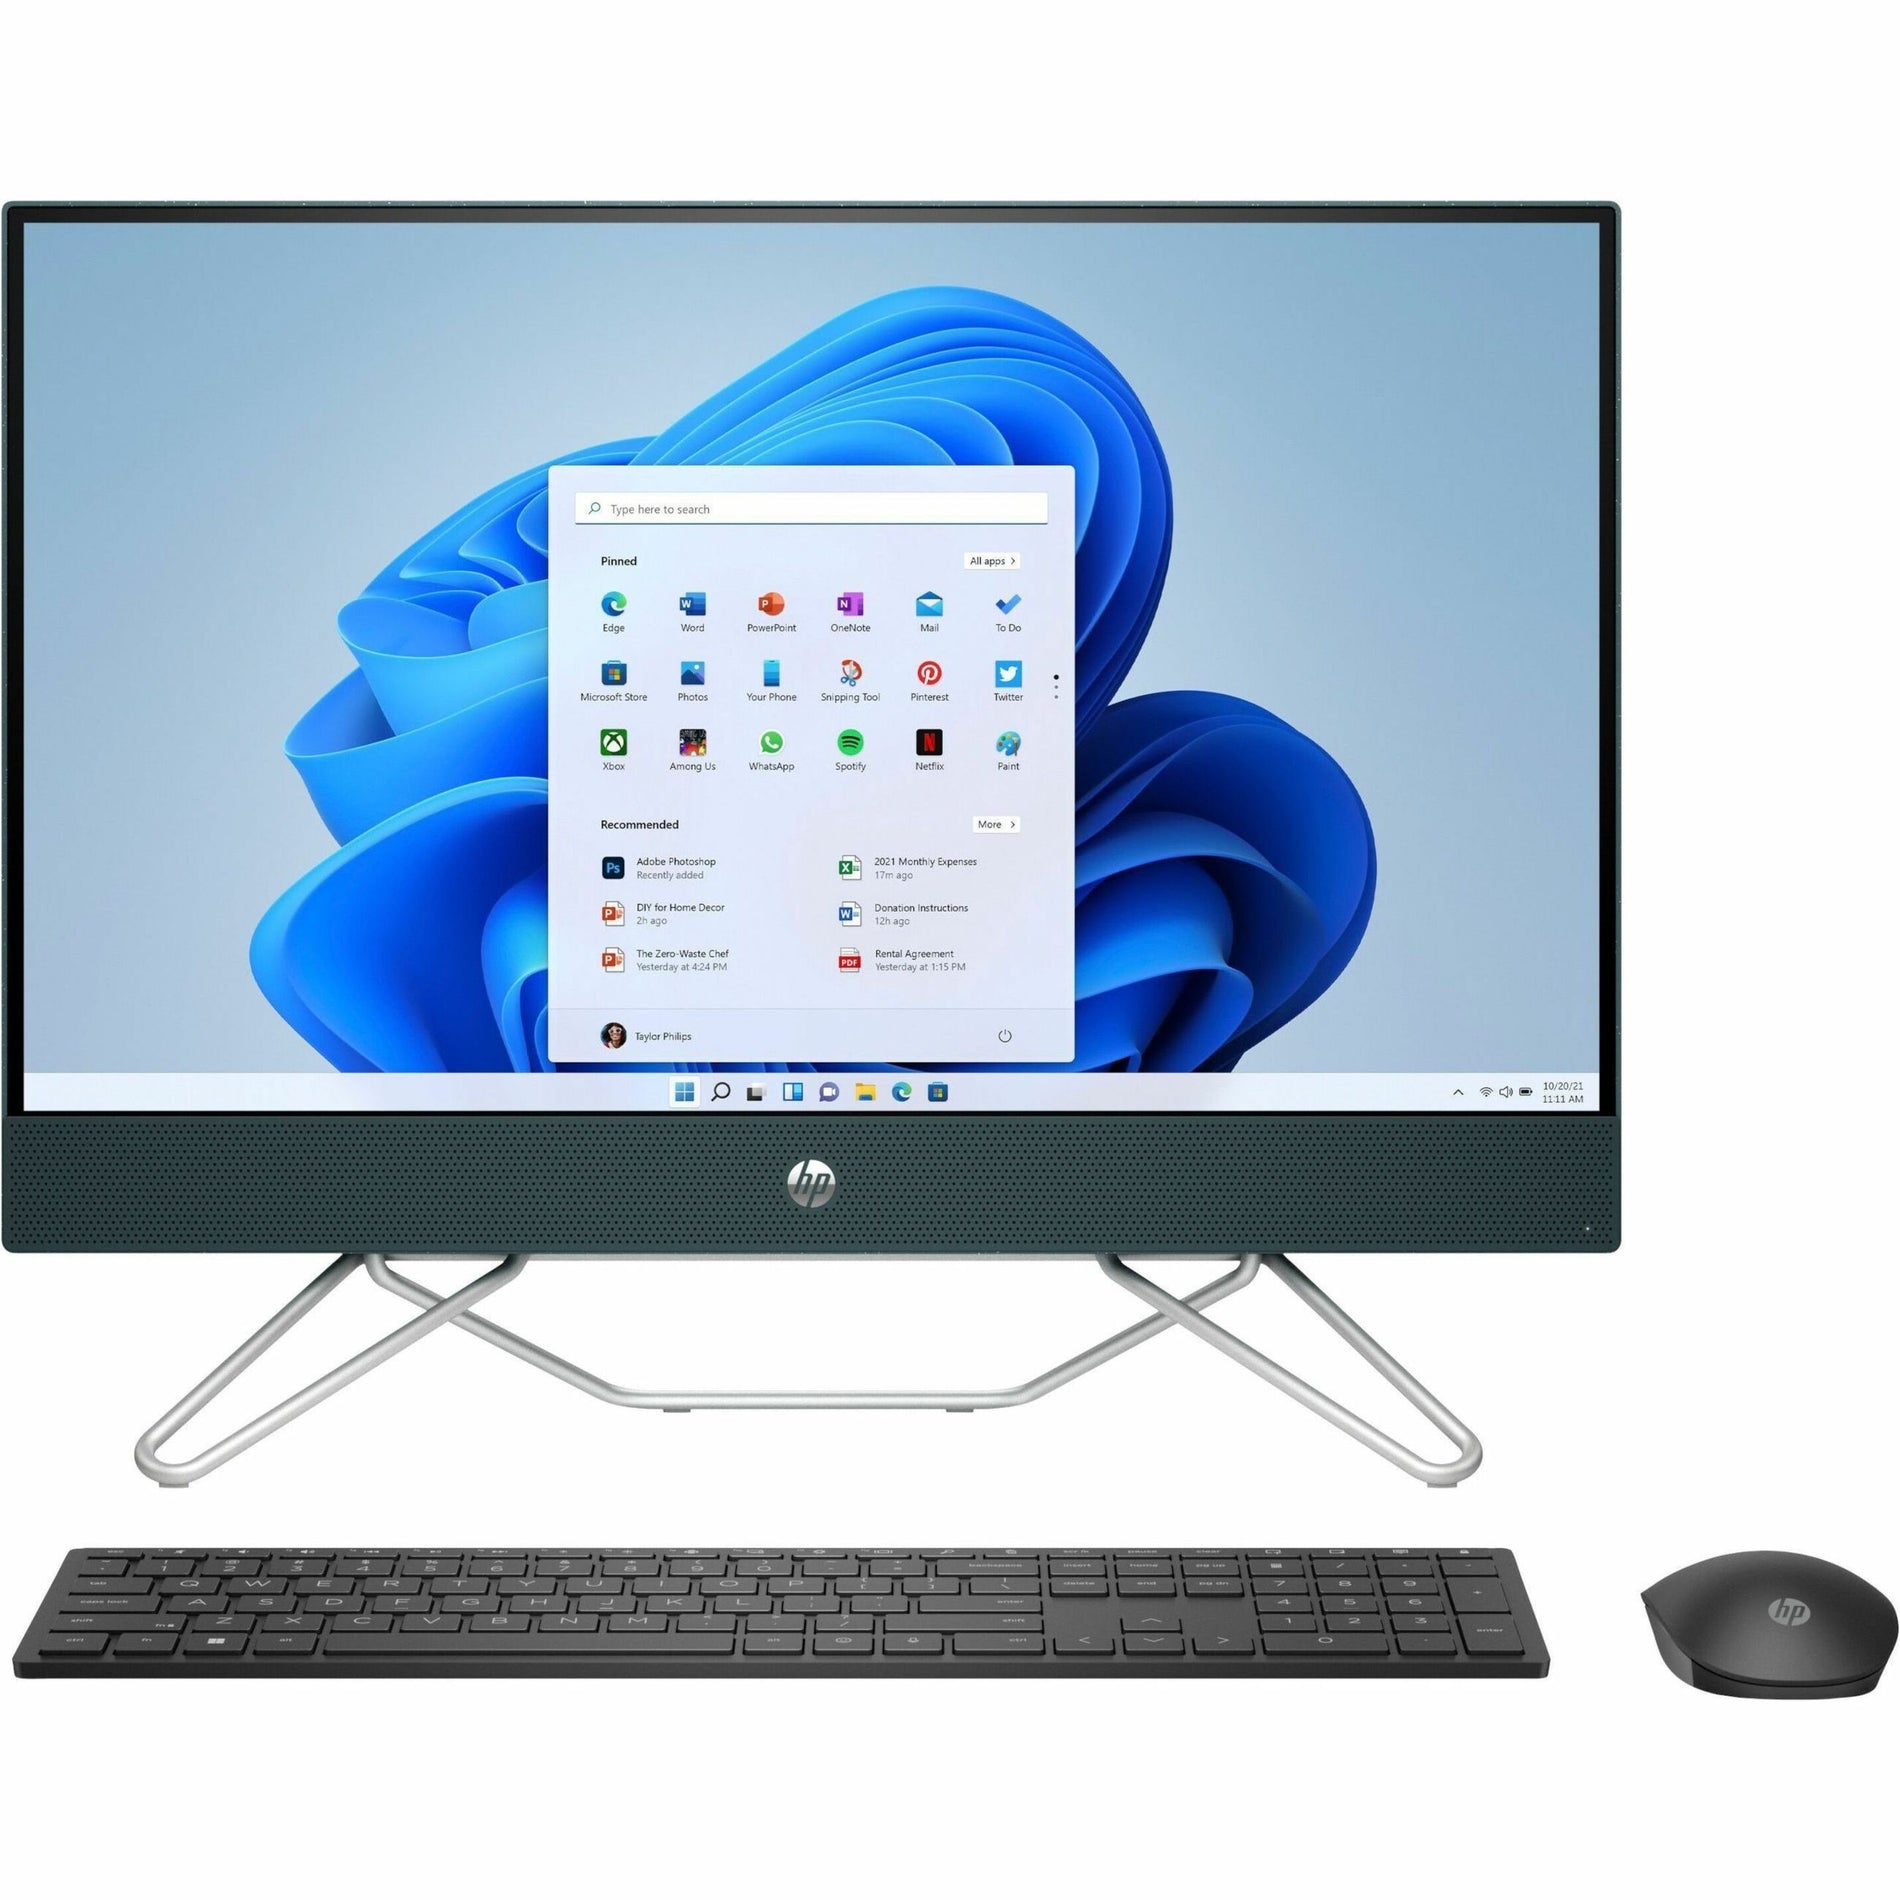 HP All-in-One 24-cb0092ds Bundle All-in-One PC, Windows 11 Home, Intel UHD Graphics 605 DDR4 SDRAM, IEEE 802.11ax